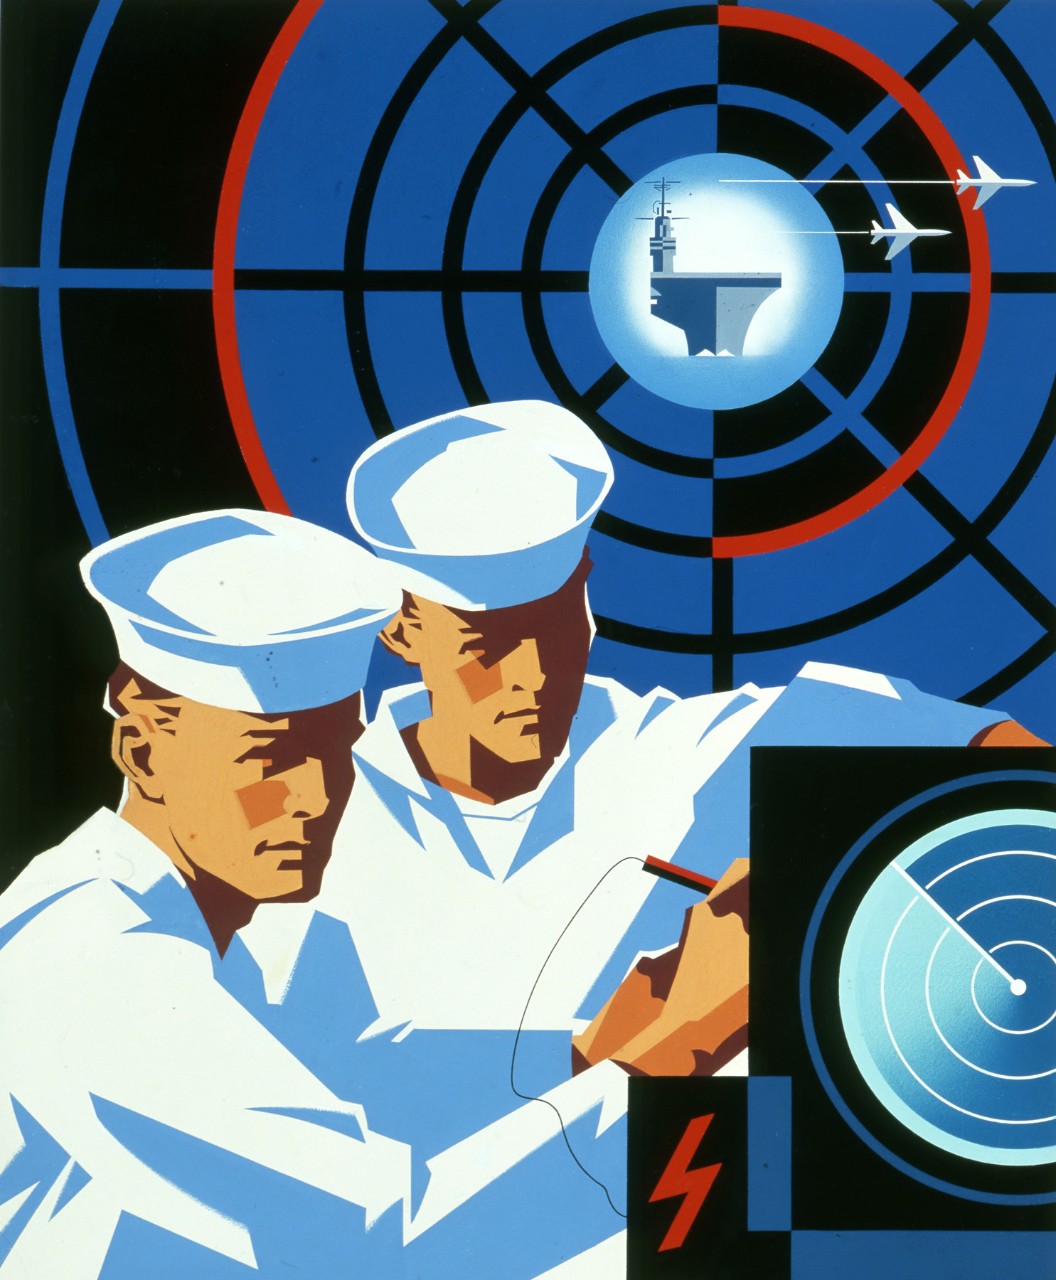 Two sailors work on a radar console, in the background is an image of a radar screen with an aircraft carrier in the center.